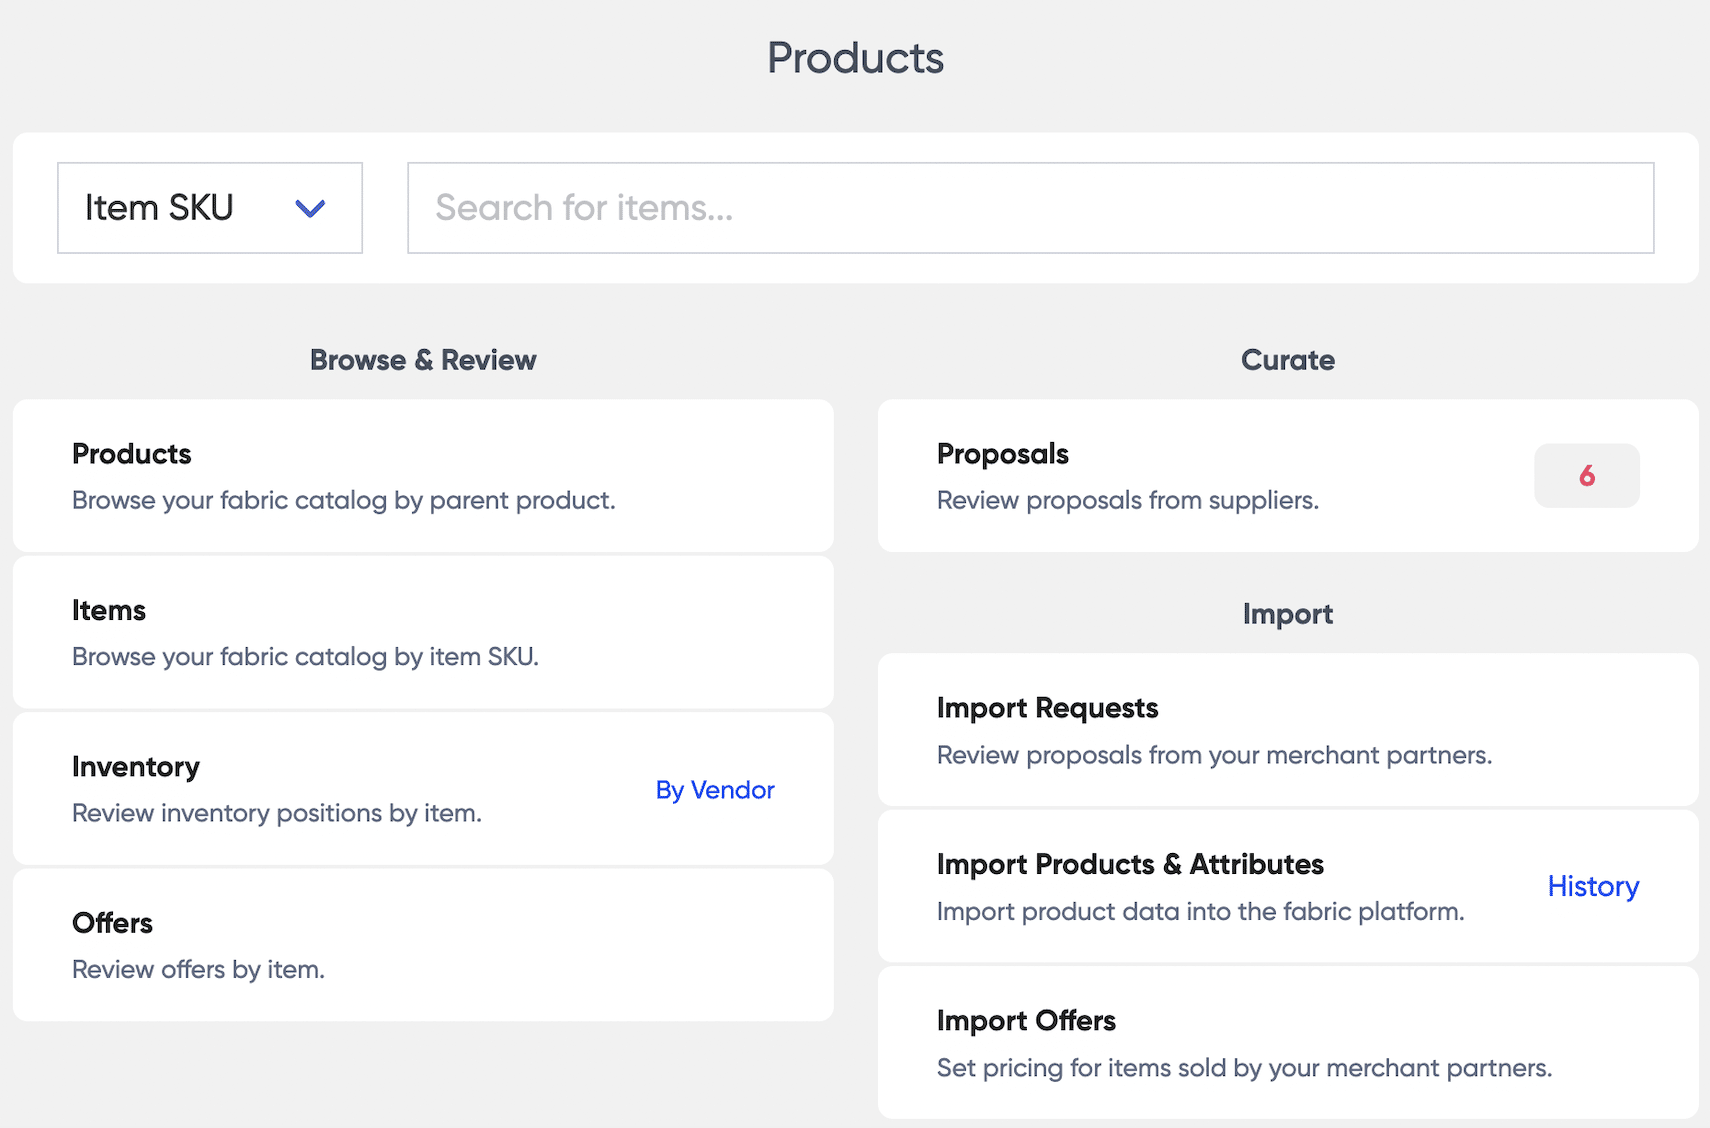 With our August product update, it's easier than ever to manage product listings.